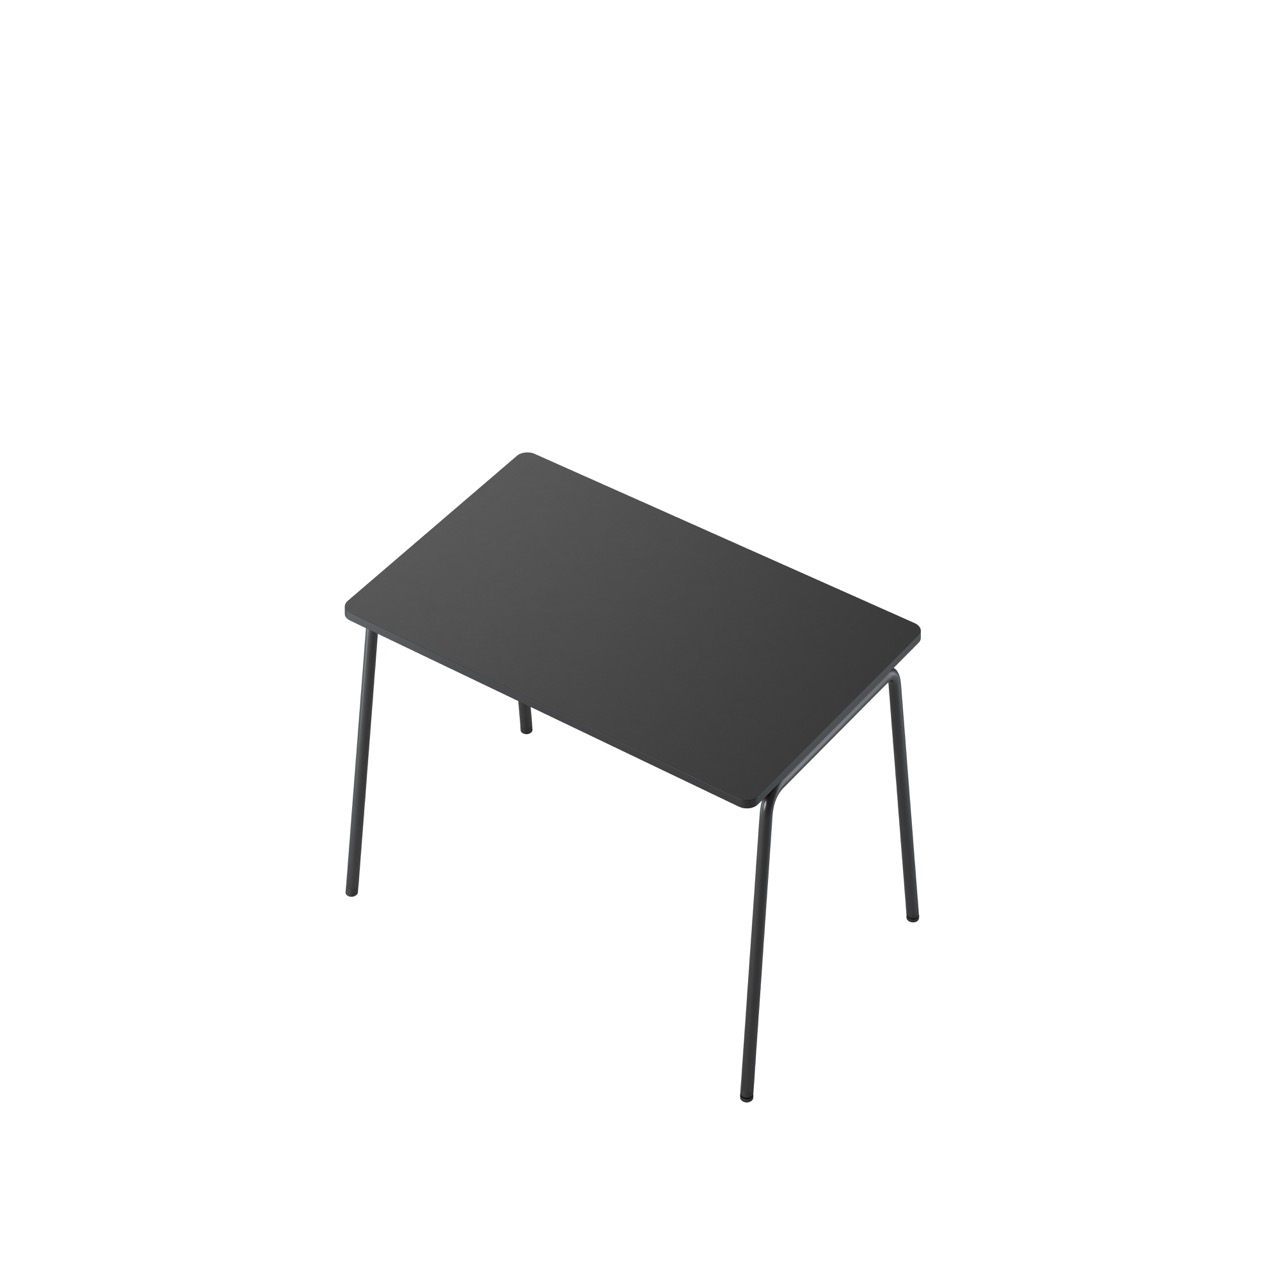 OCEE&FOUR - Tables - 120 x 80 - Angled - Packshot Image 2 Large